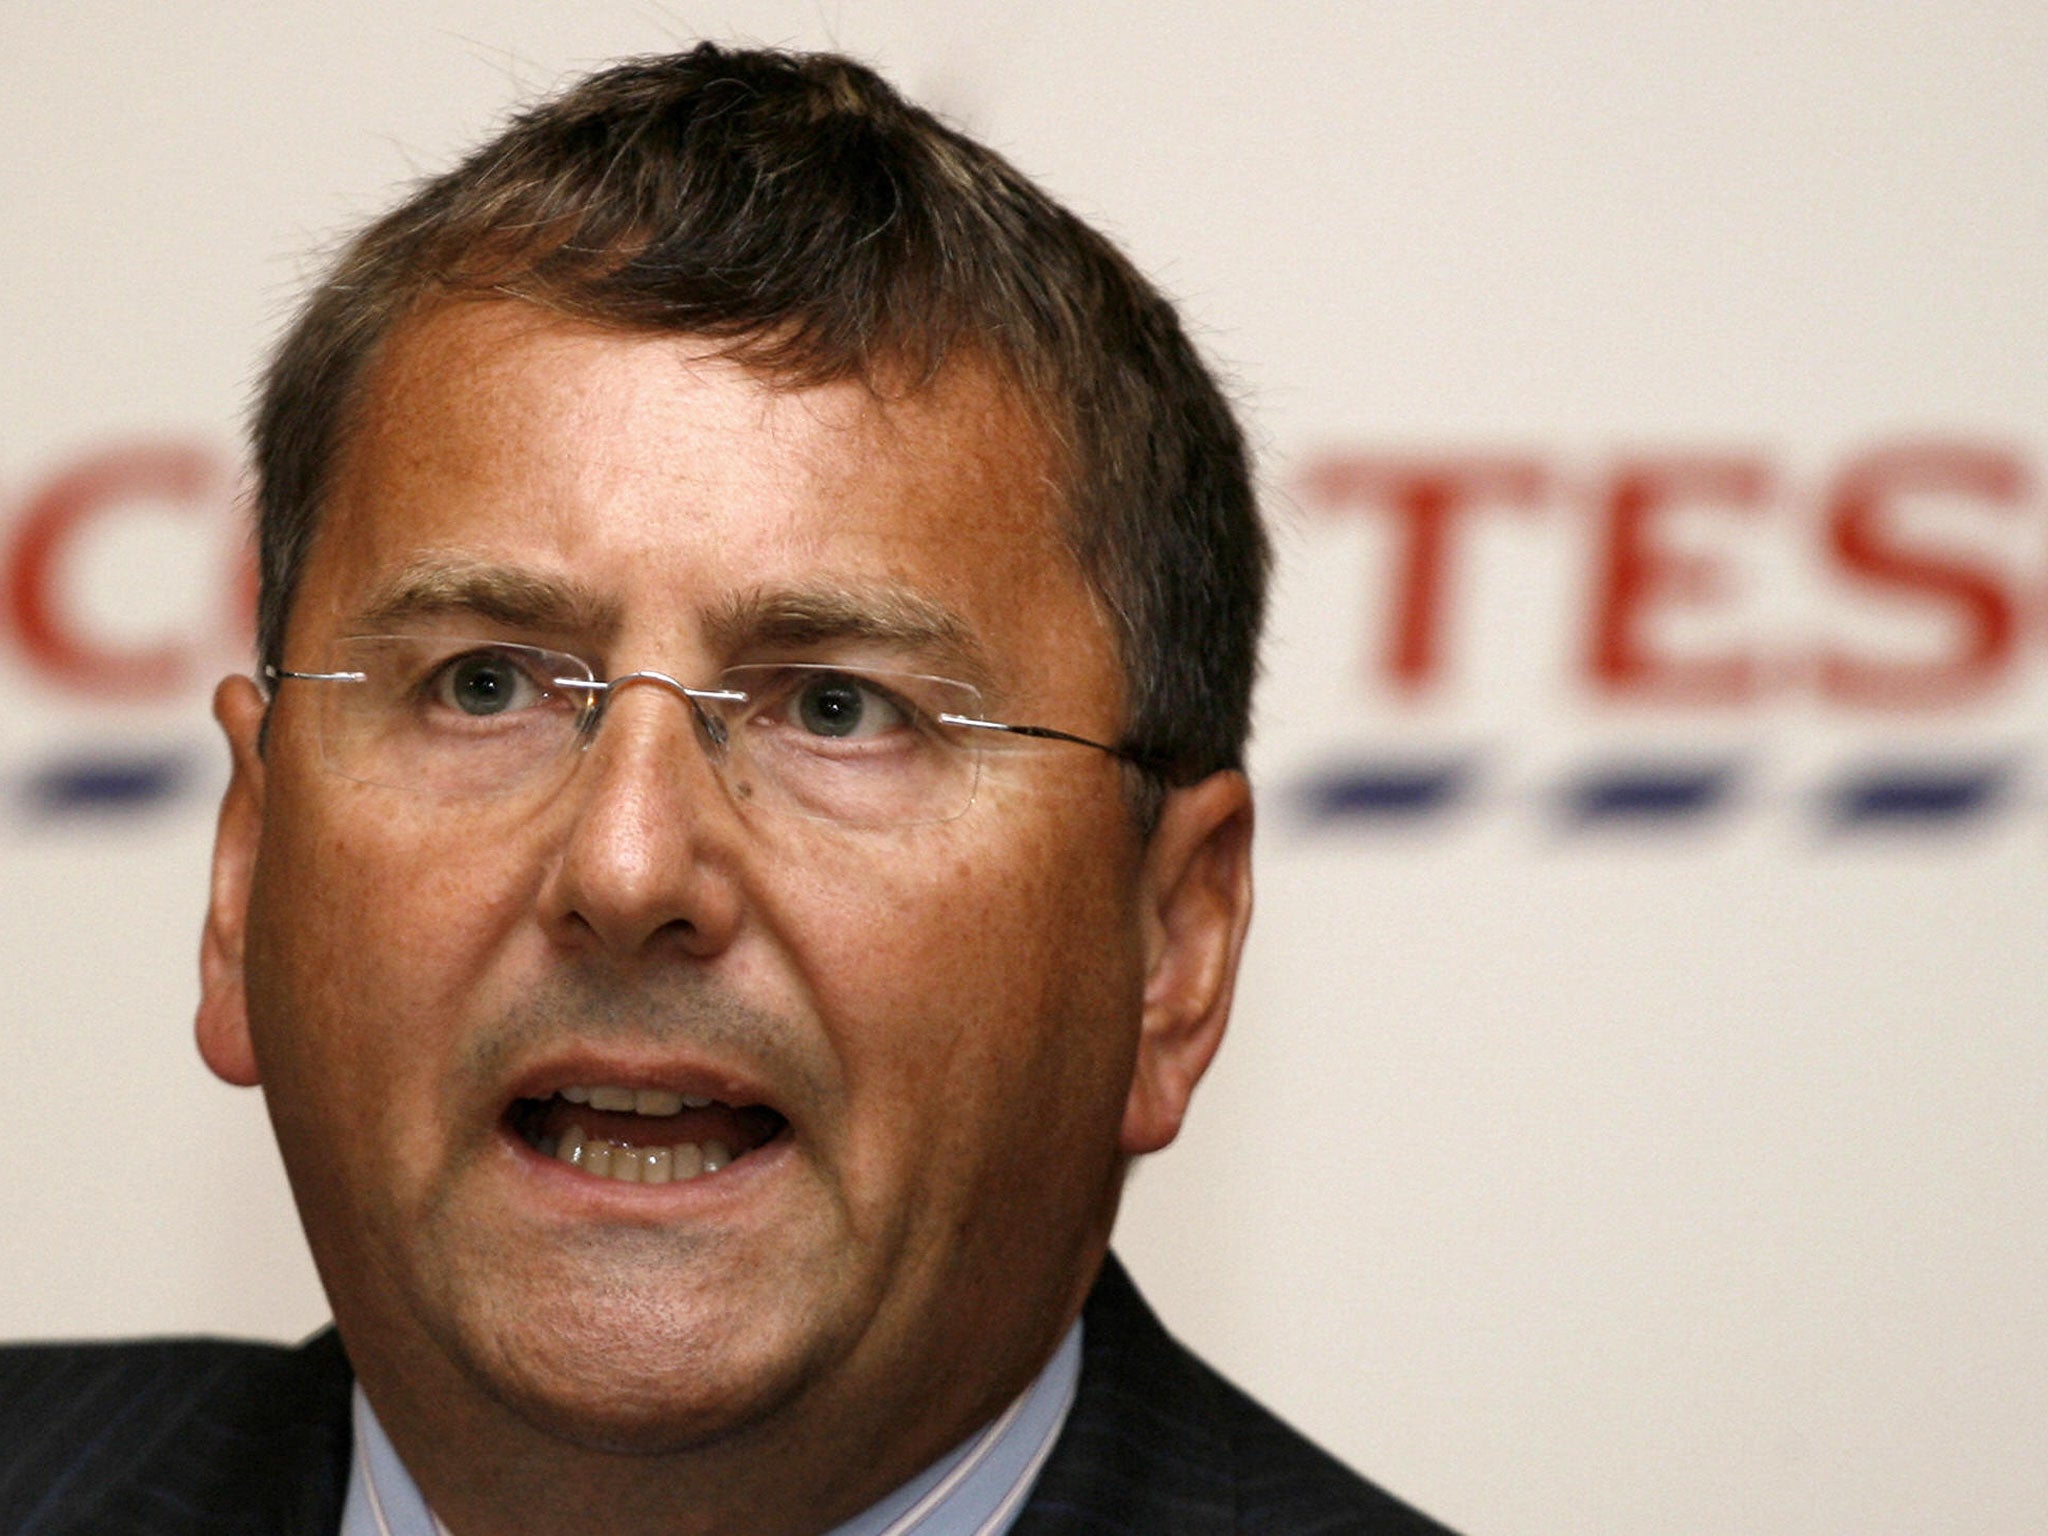 Tesco boss Philip Clarke is under pressure from investors as the supermarket continues to battle a challenging market